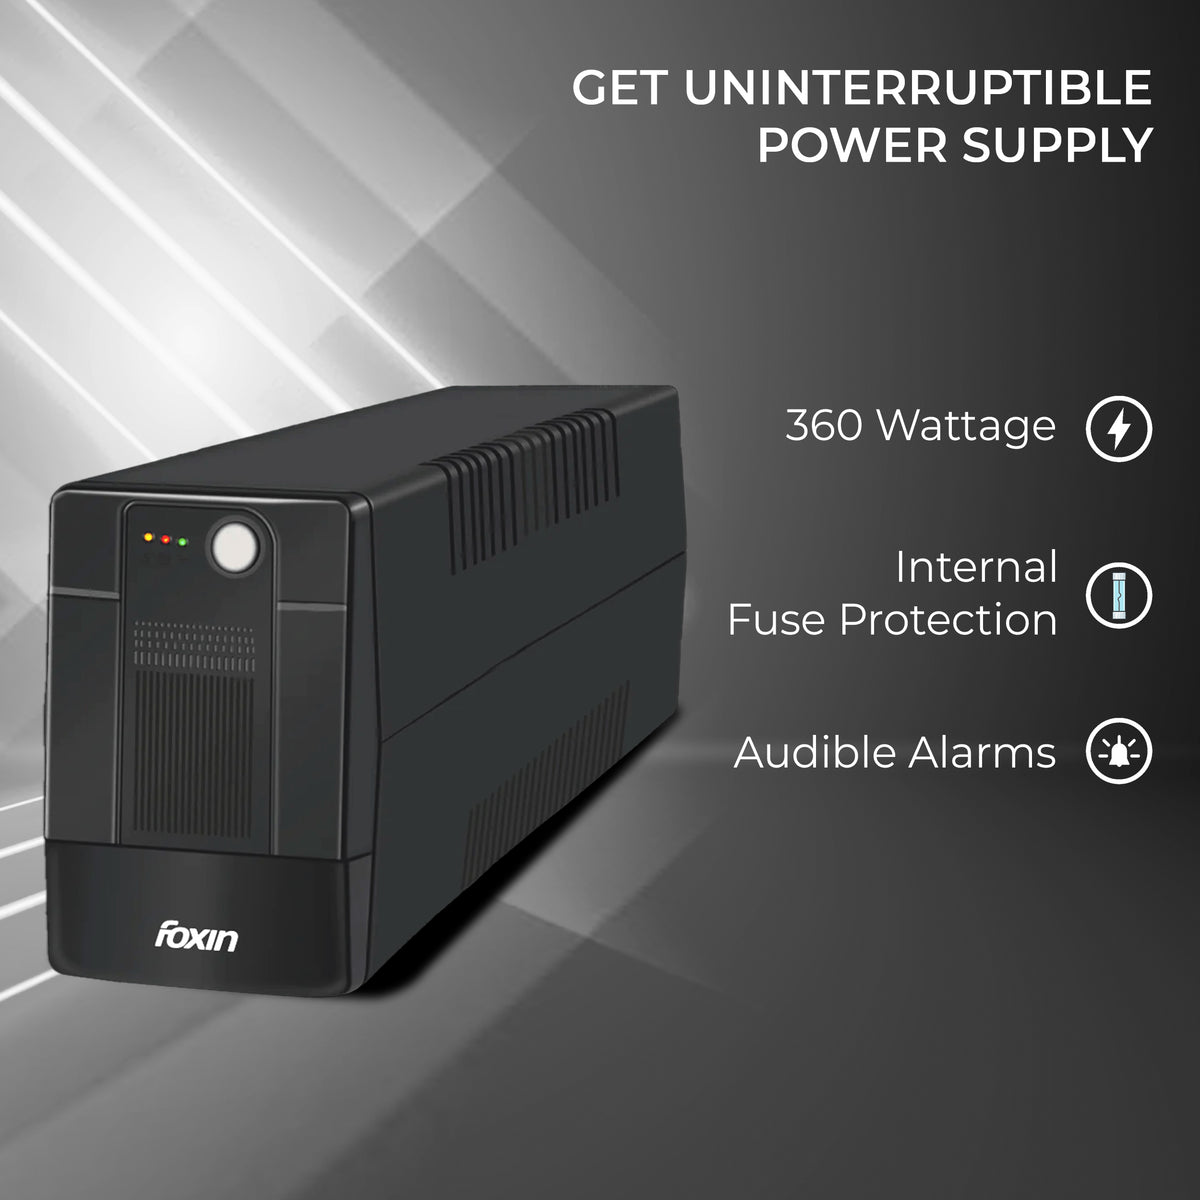 Foxin FPS-1001 Uninterrupted Power Supply (UPS), with 1000VA/360Watt Cold-Start Functionality